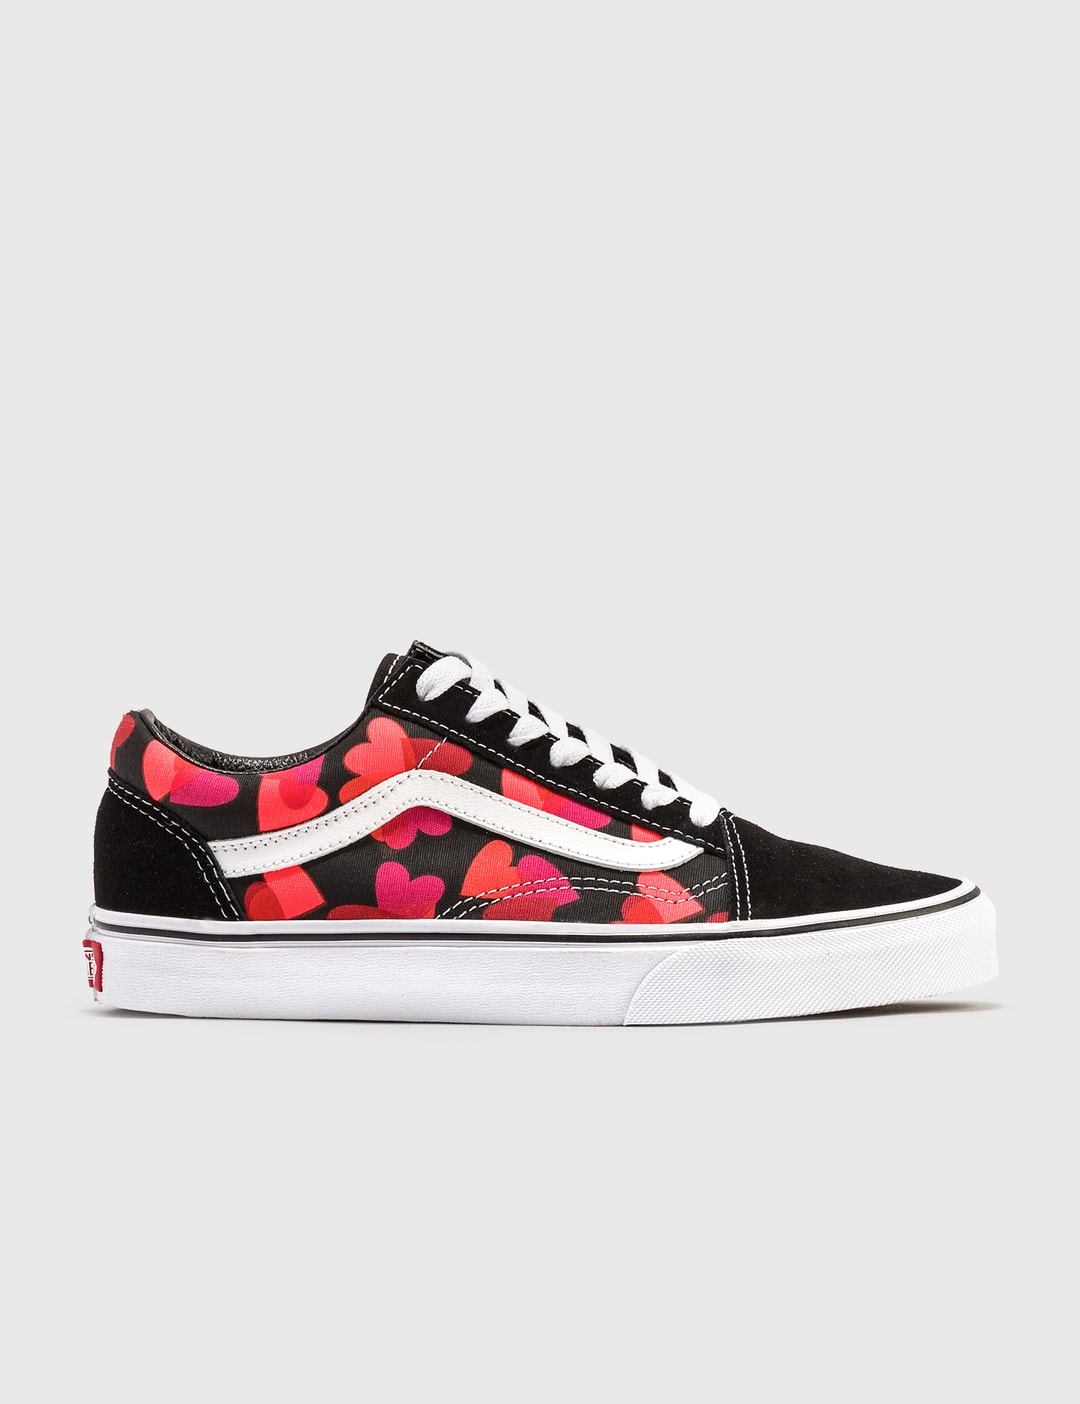 Picasso Peninsula silent Vans - Valentines Hearts Old Skool | HBX - Globally Curated Fashion and  Lifestyle by Hypebeast